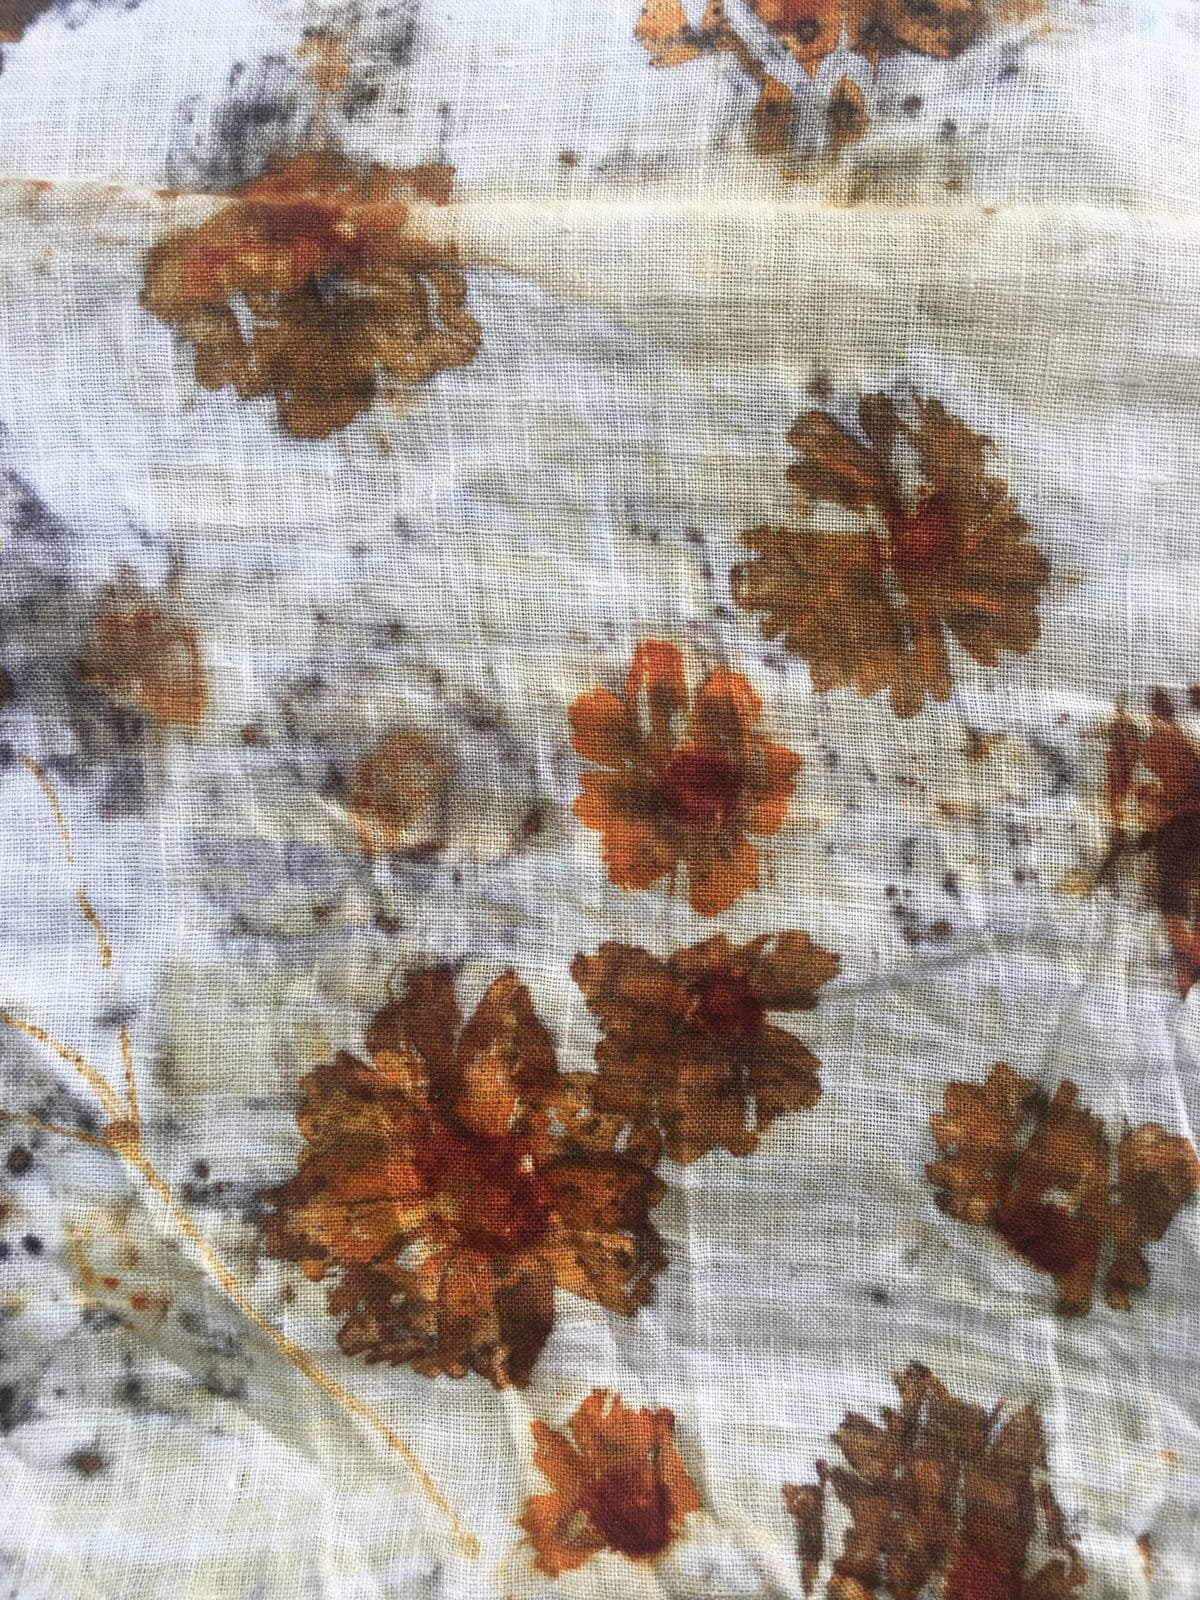 image description: ecoprinted fabric, orange and brown flowers on white fabric